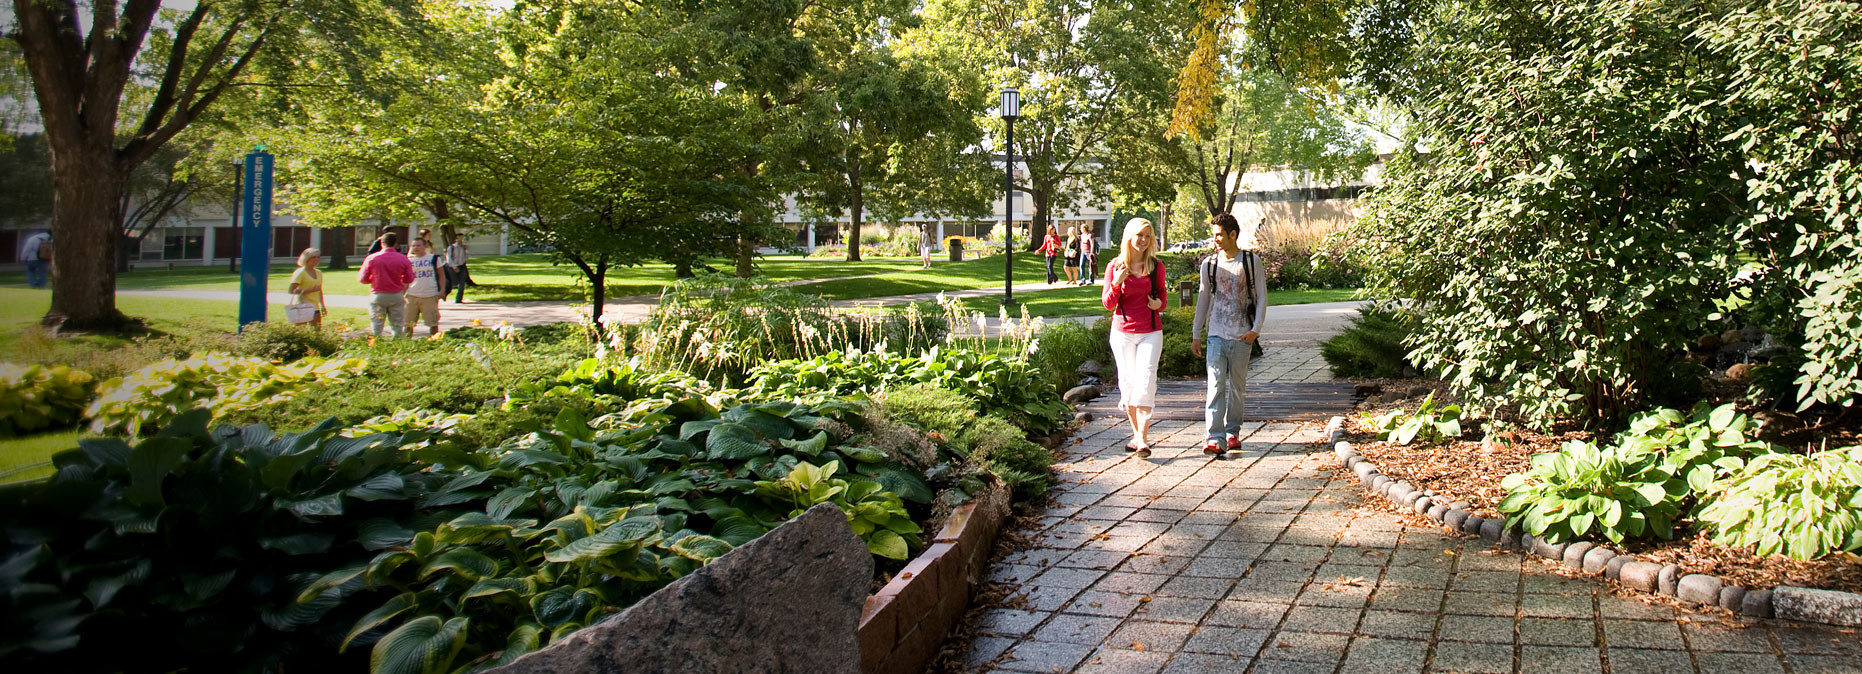 St. Cloud State University Students Walking on Campus